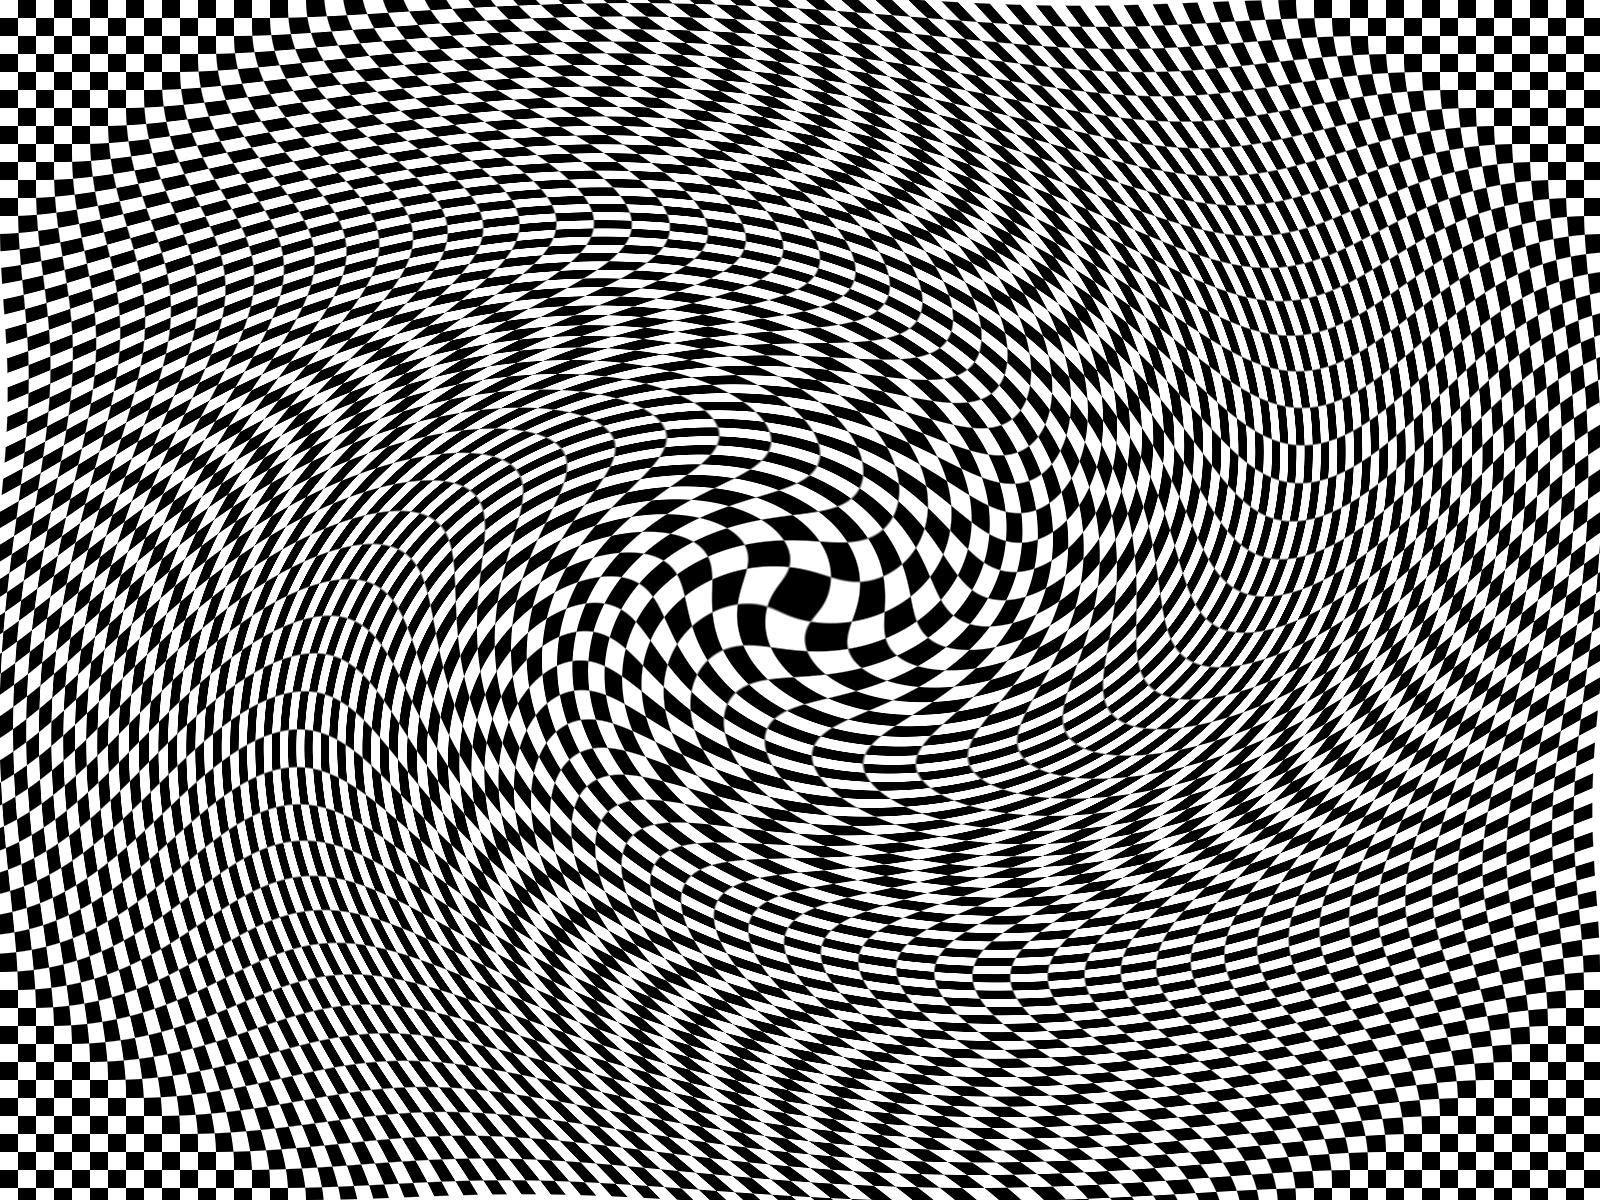 Trippy Moving Illusions Background Do not stare this illusion